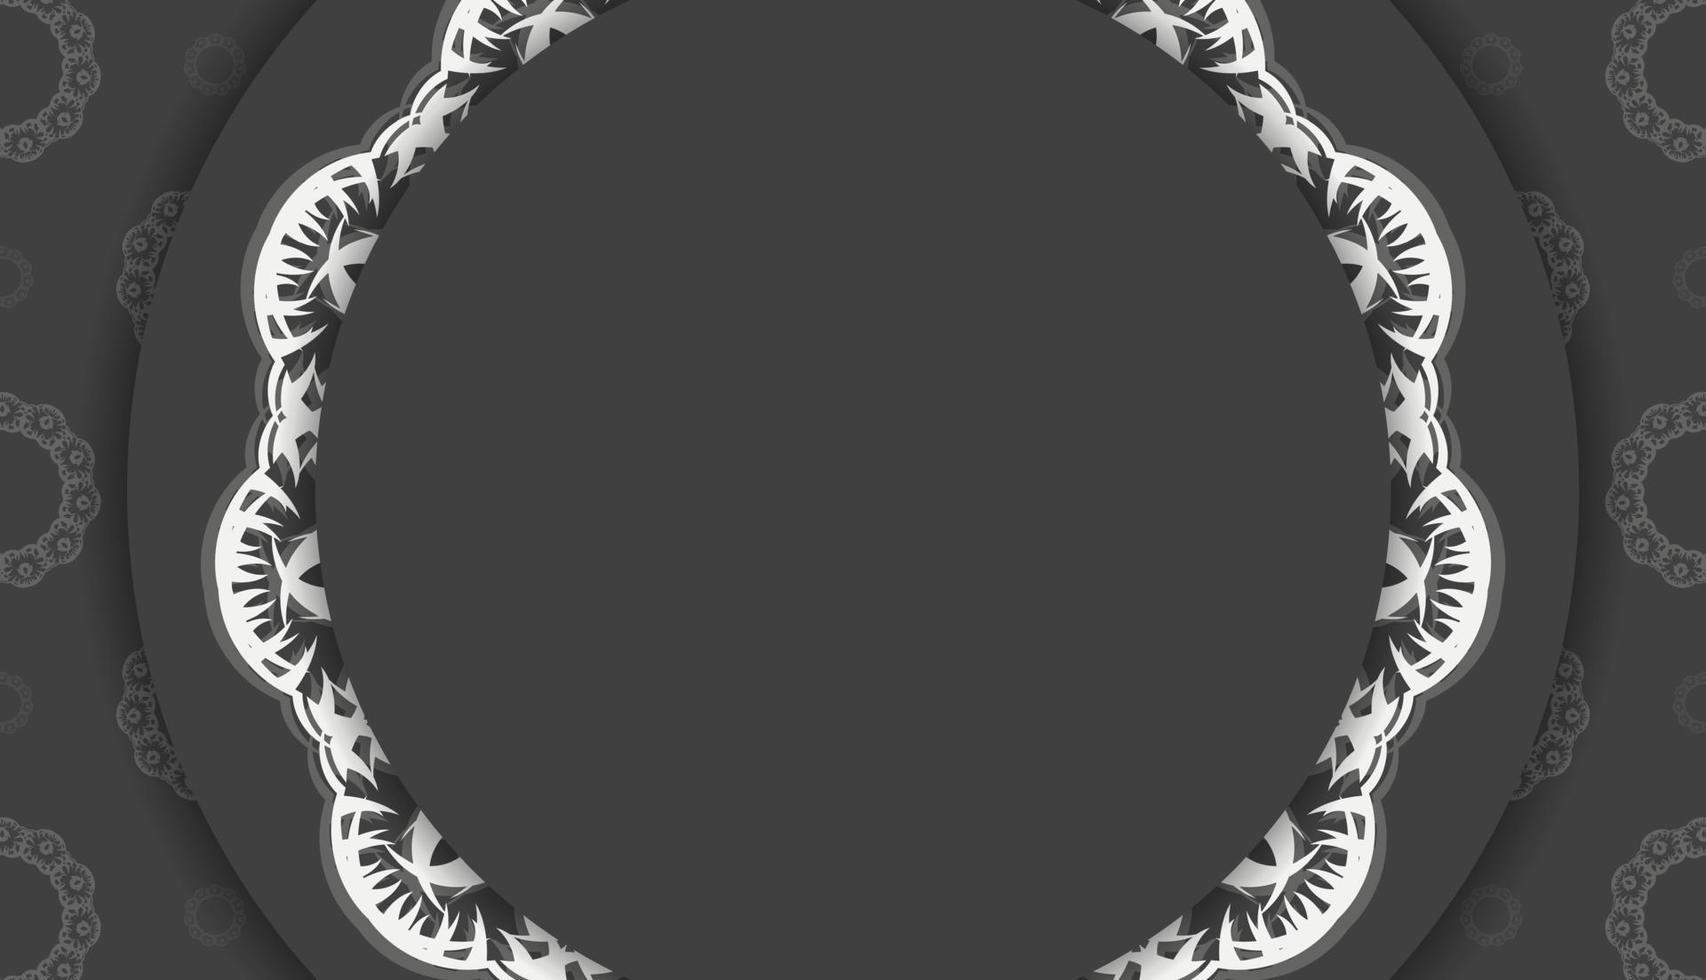 Baner in black with luxurious white ornaments and a place for your logo vector